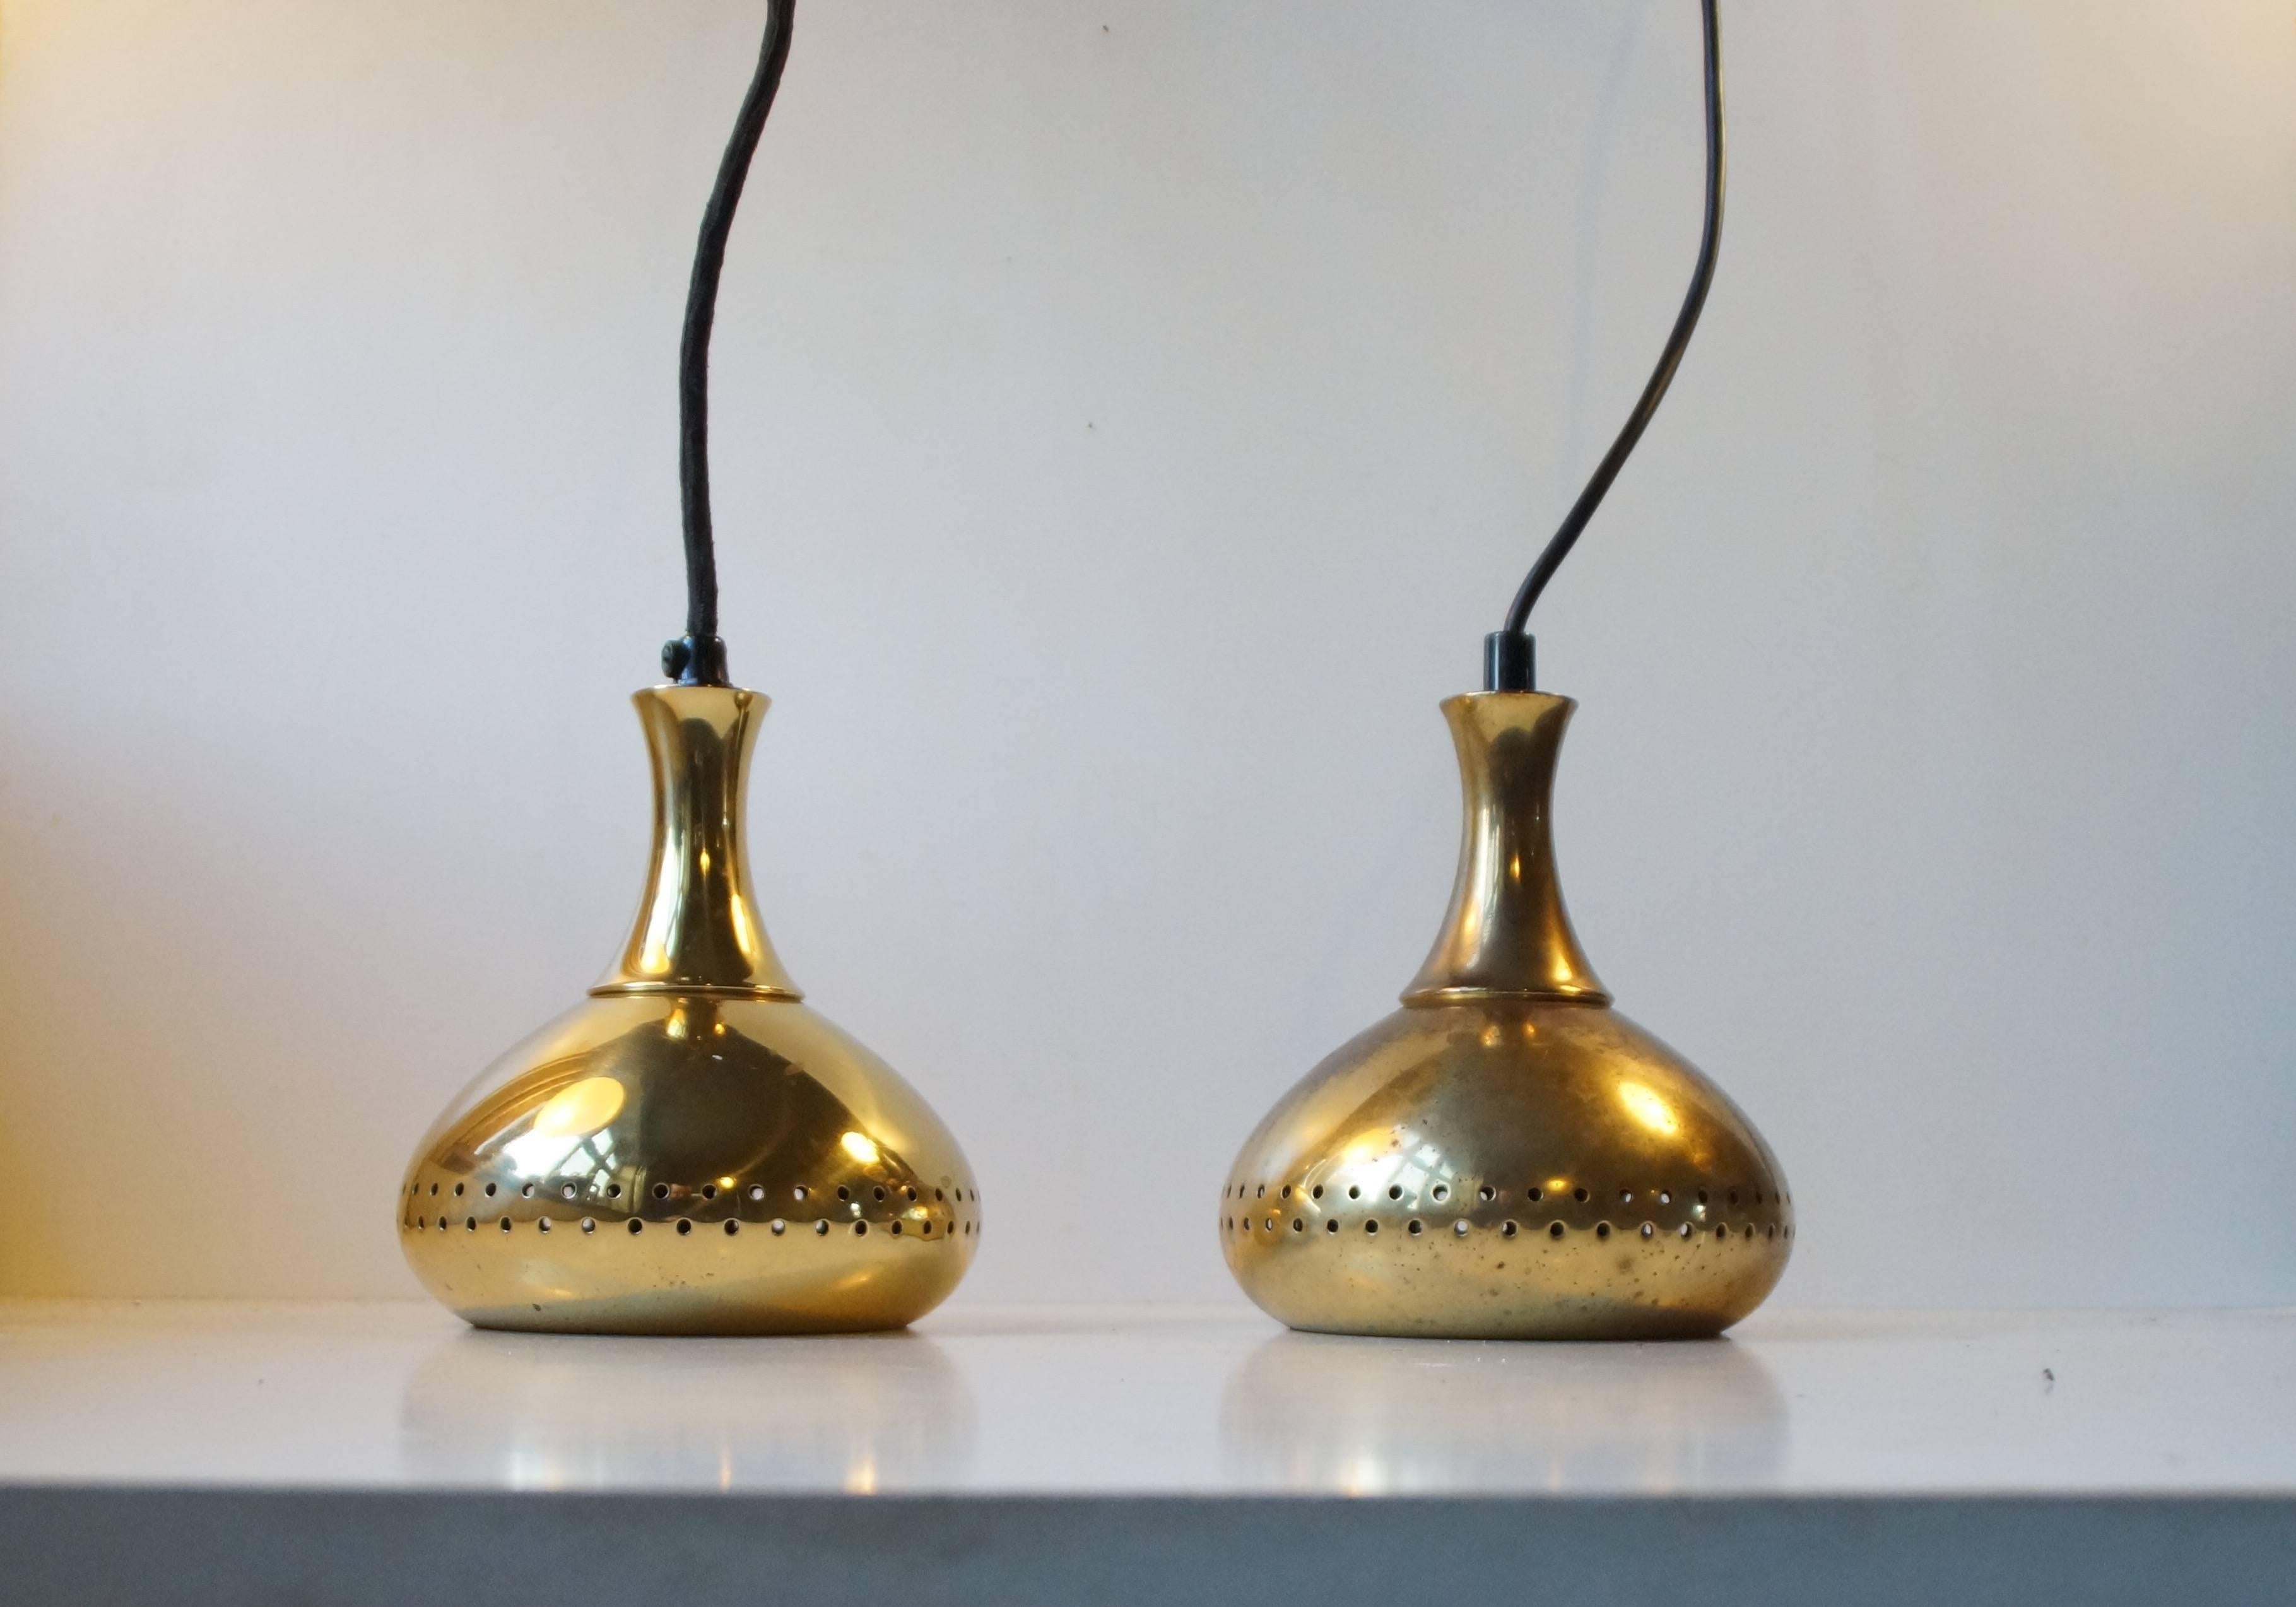 A pair of small pendants in partially perforated brass designed by Hans-Agne Jakobsson and manufactured by Markaryd AB in Sweden during the late 1950s. Very nice vintage condition, one slightly more patinated than the other. The lamps comes with new